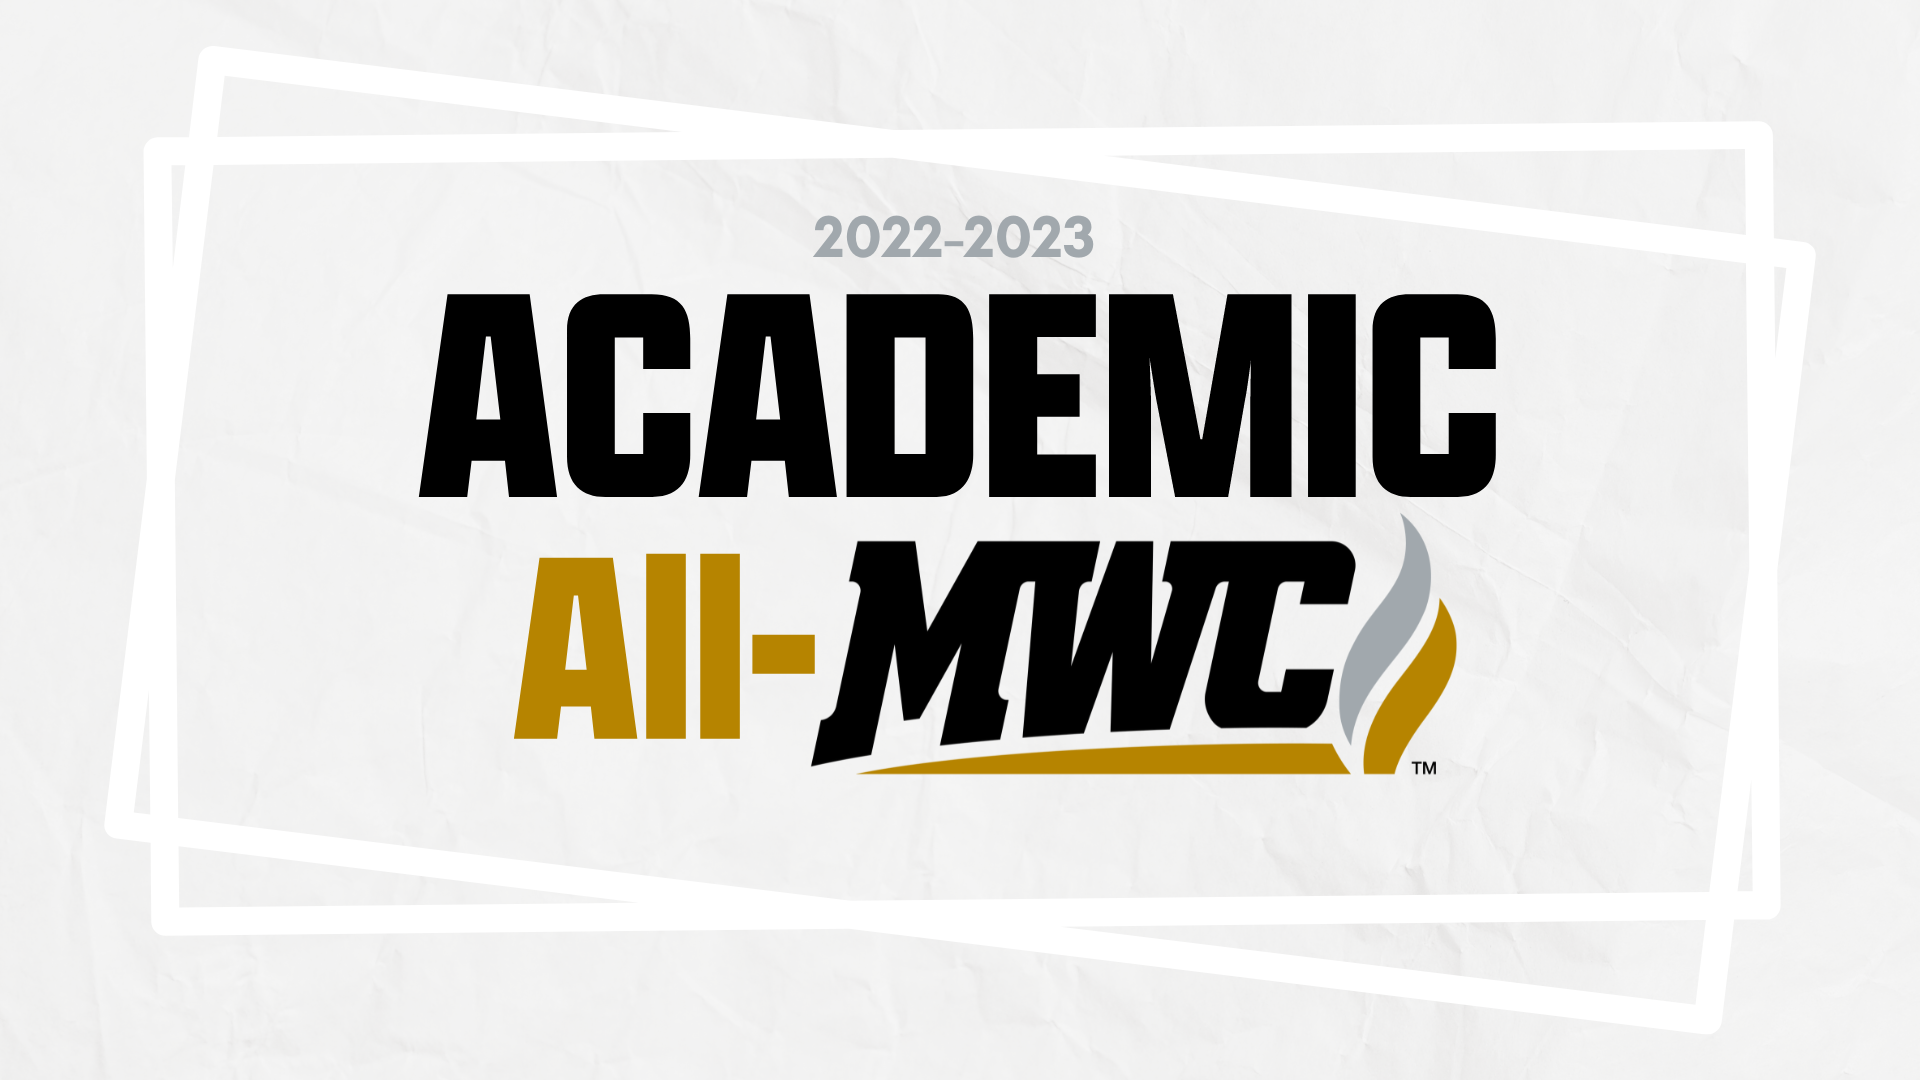 159 Foresters Named Academic All-MWC